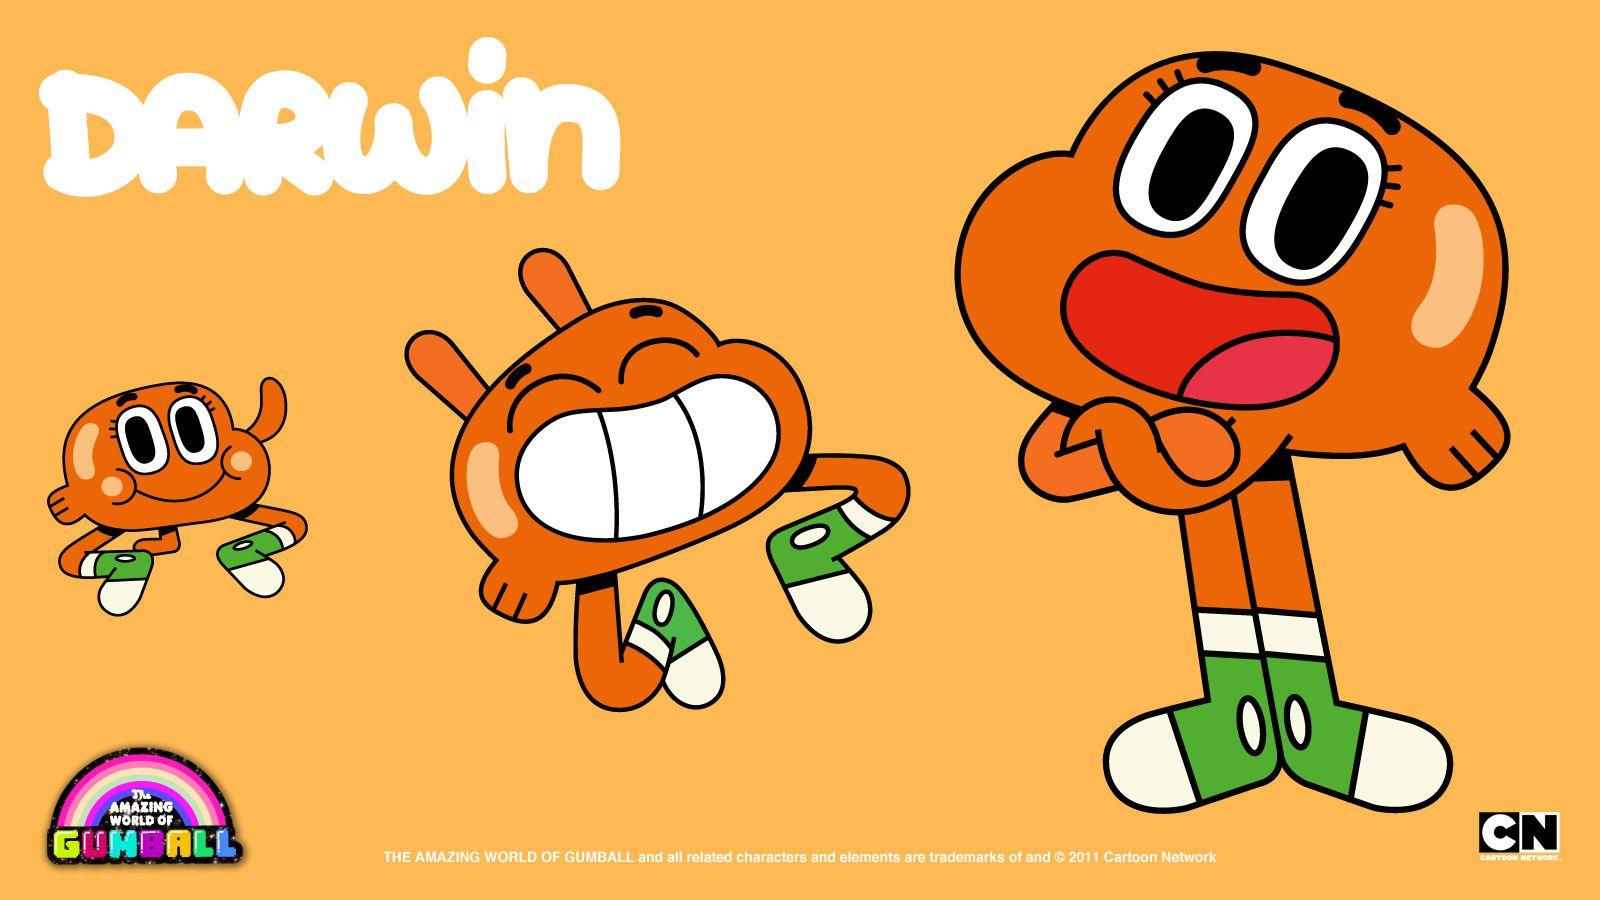 image about the amazing world of gumball